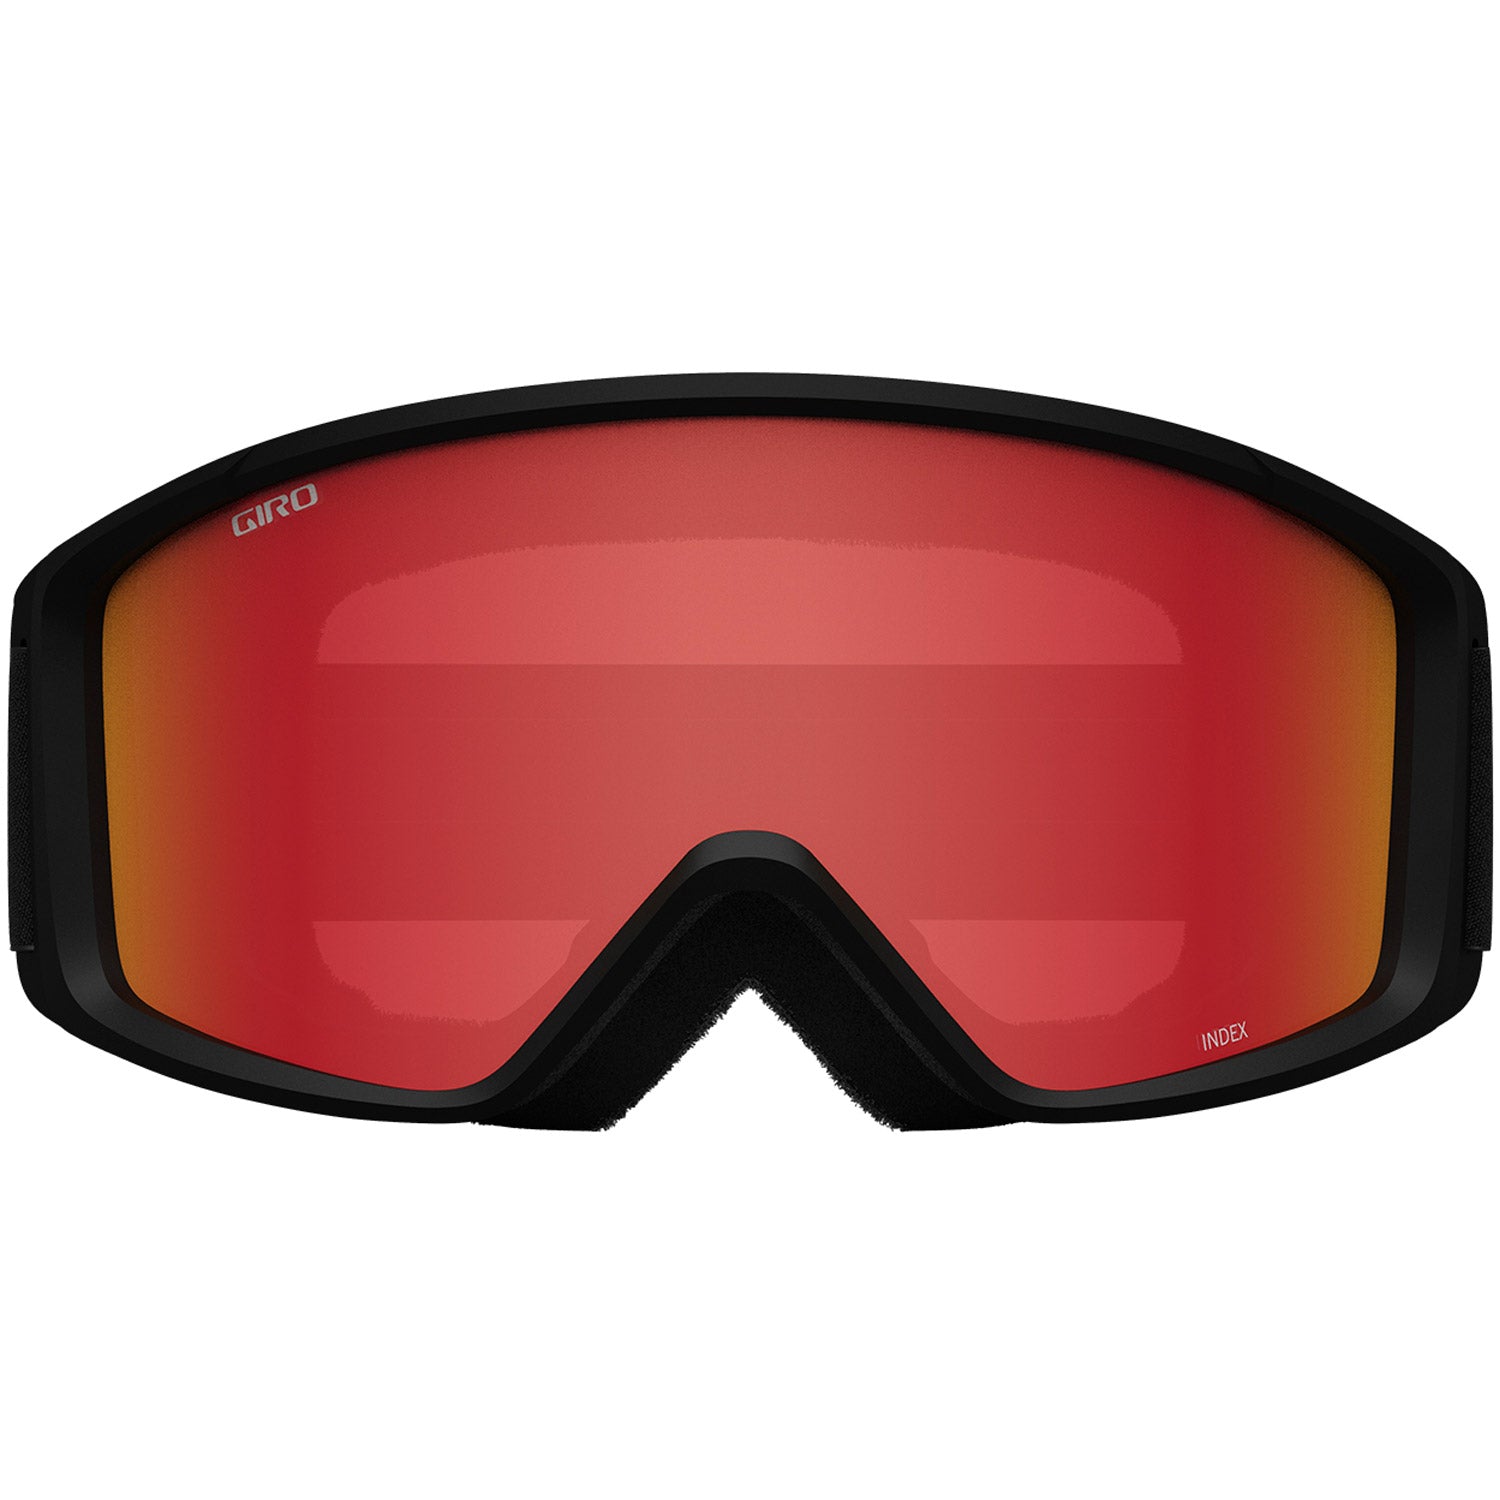 Index 2.0 Asian Fit Snow Goggle